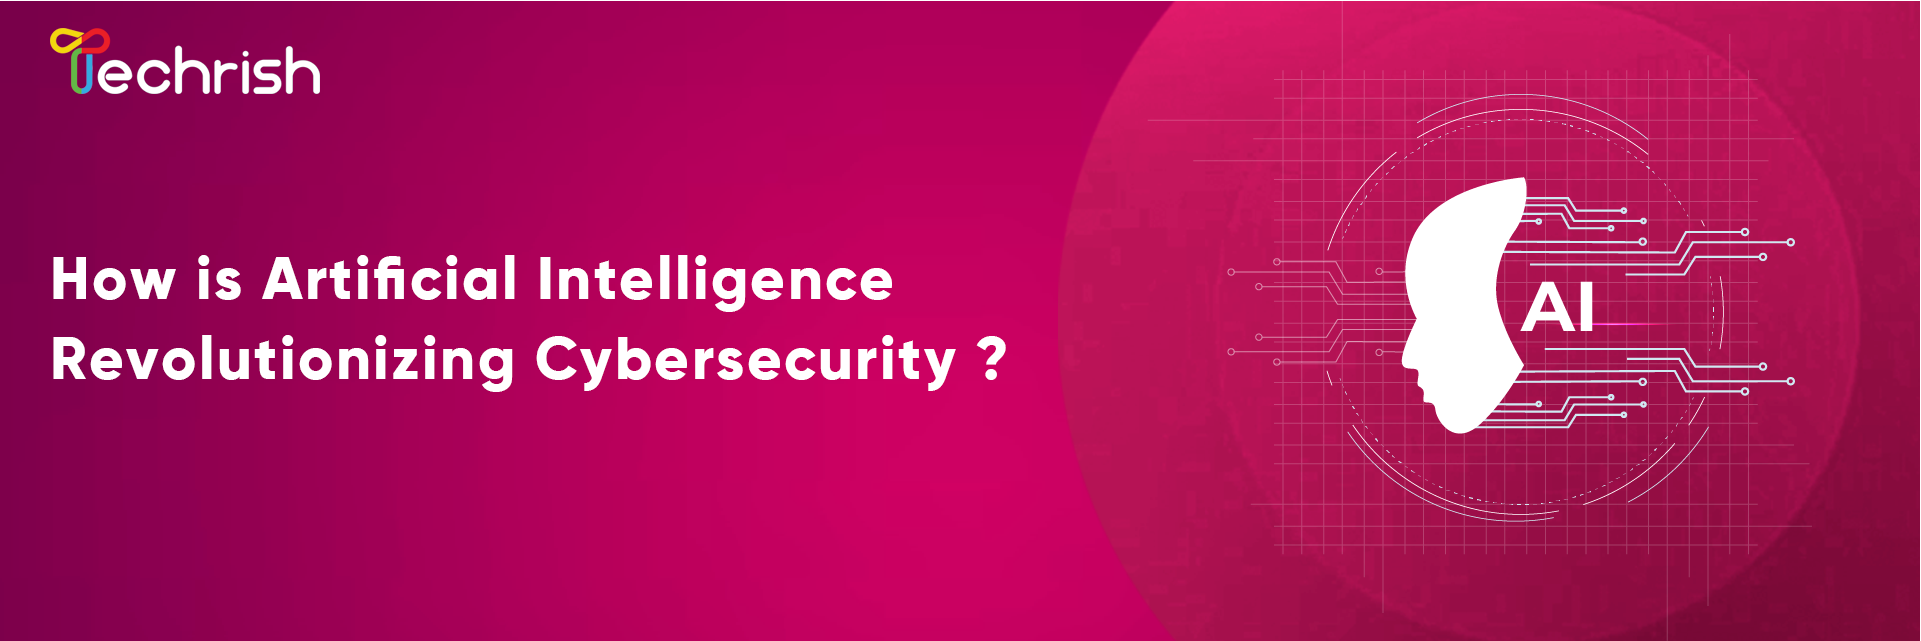 How is Artificial Intelligence Revolutionizing Cybersecurity?